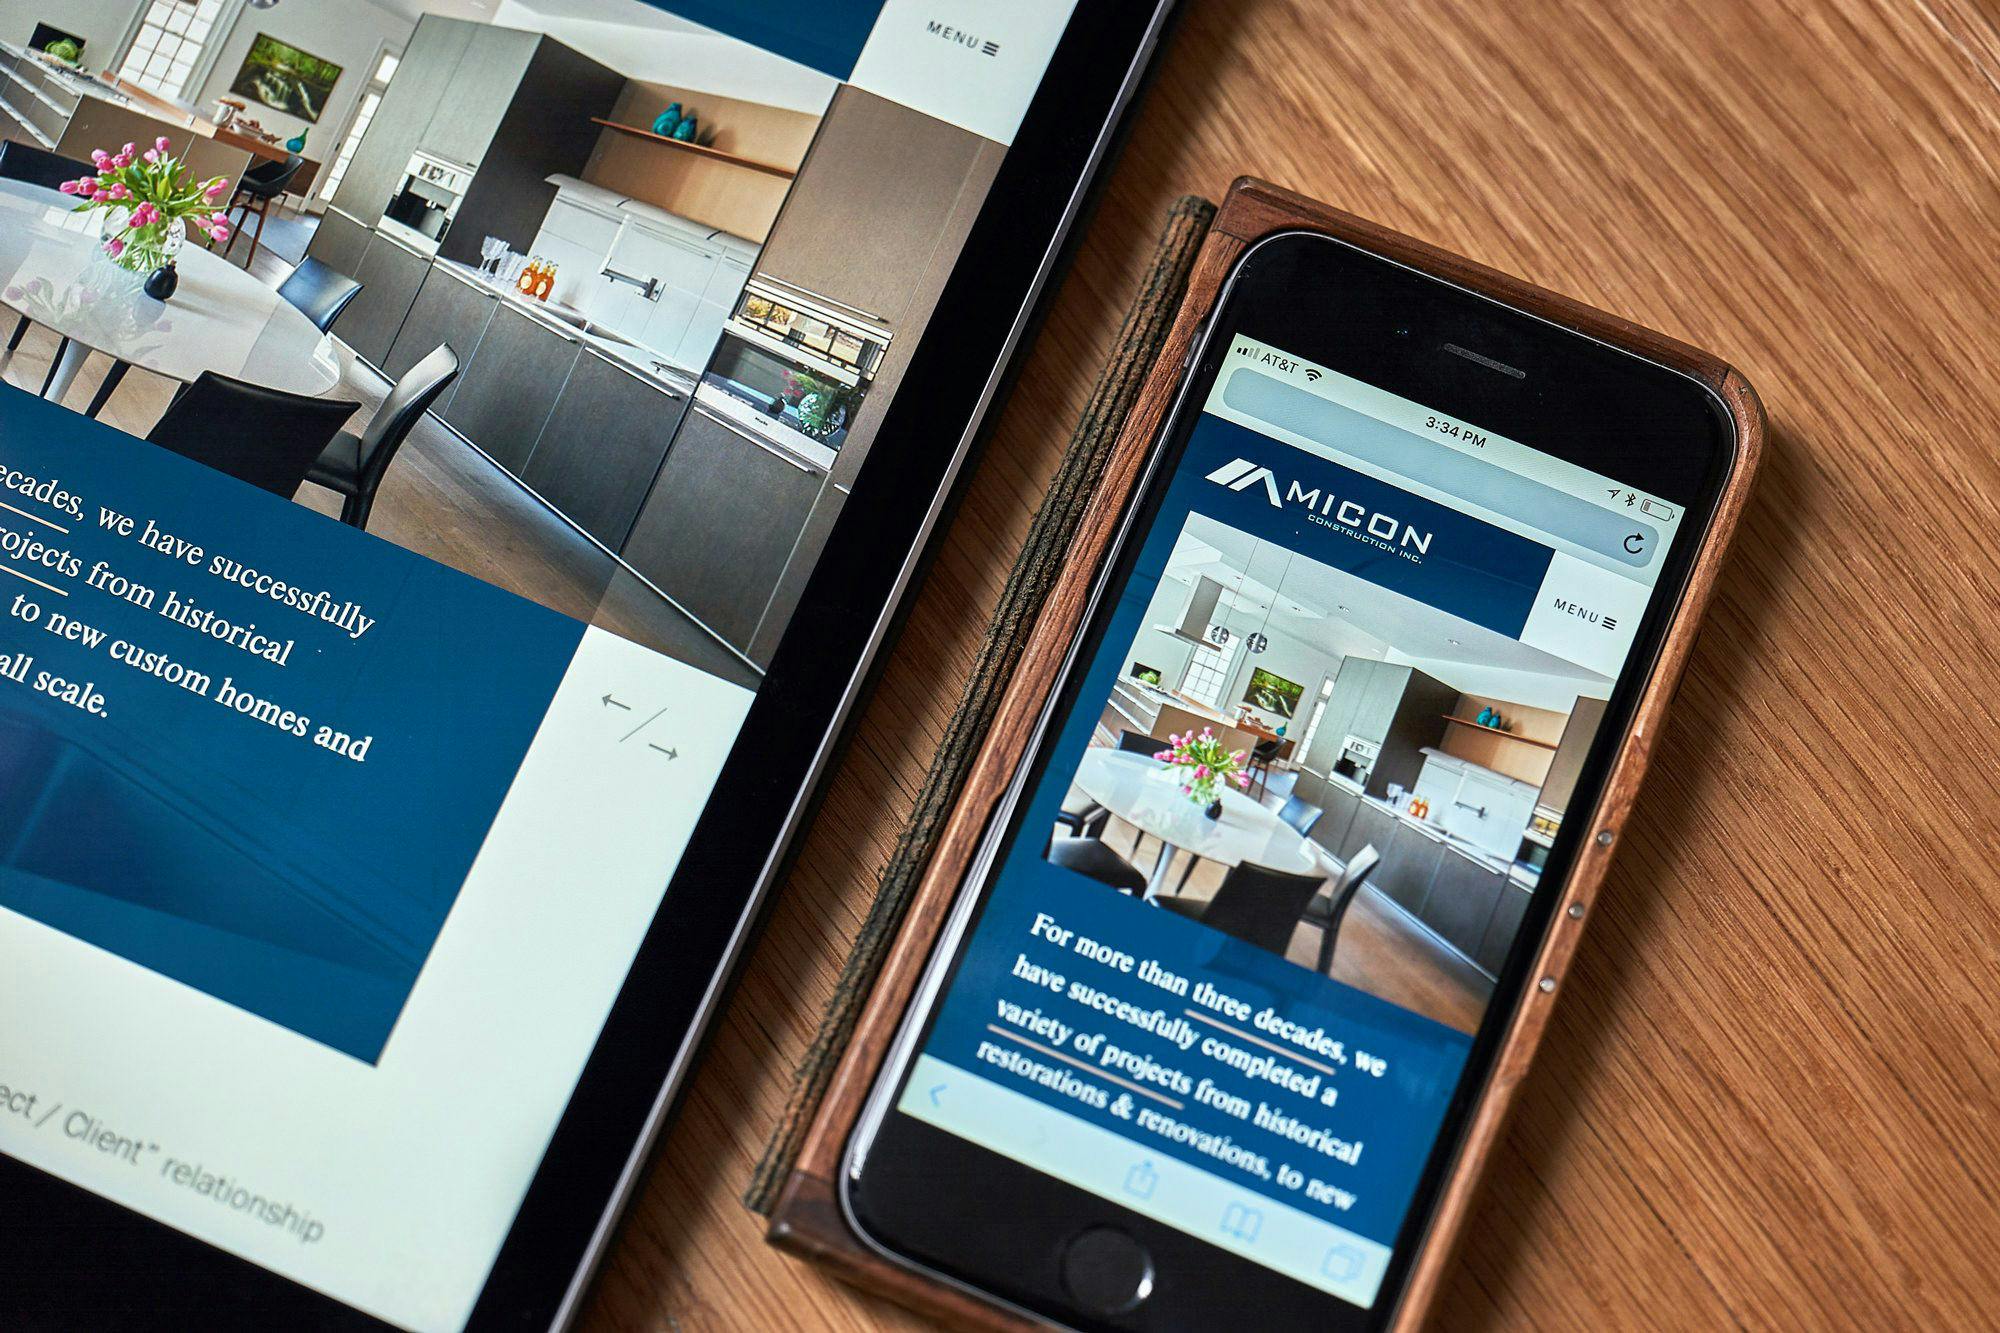 Responsive website design for Micon Construction